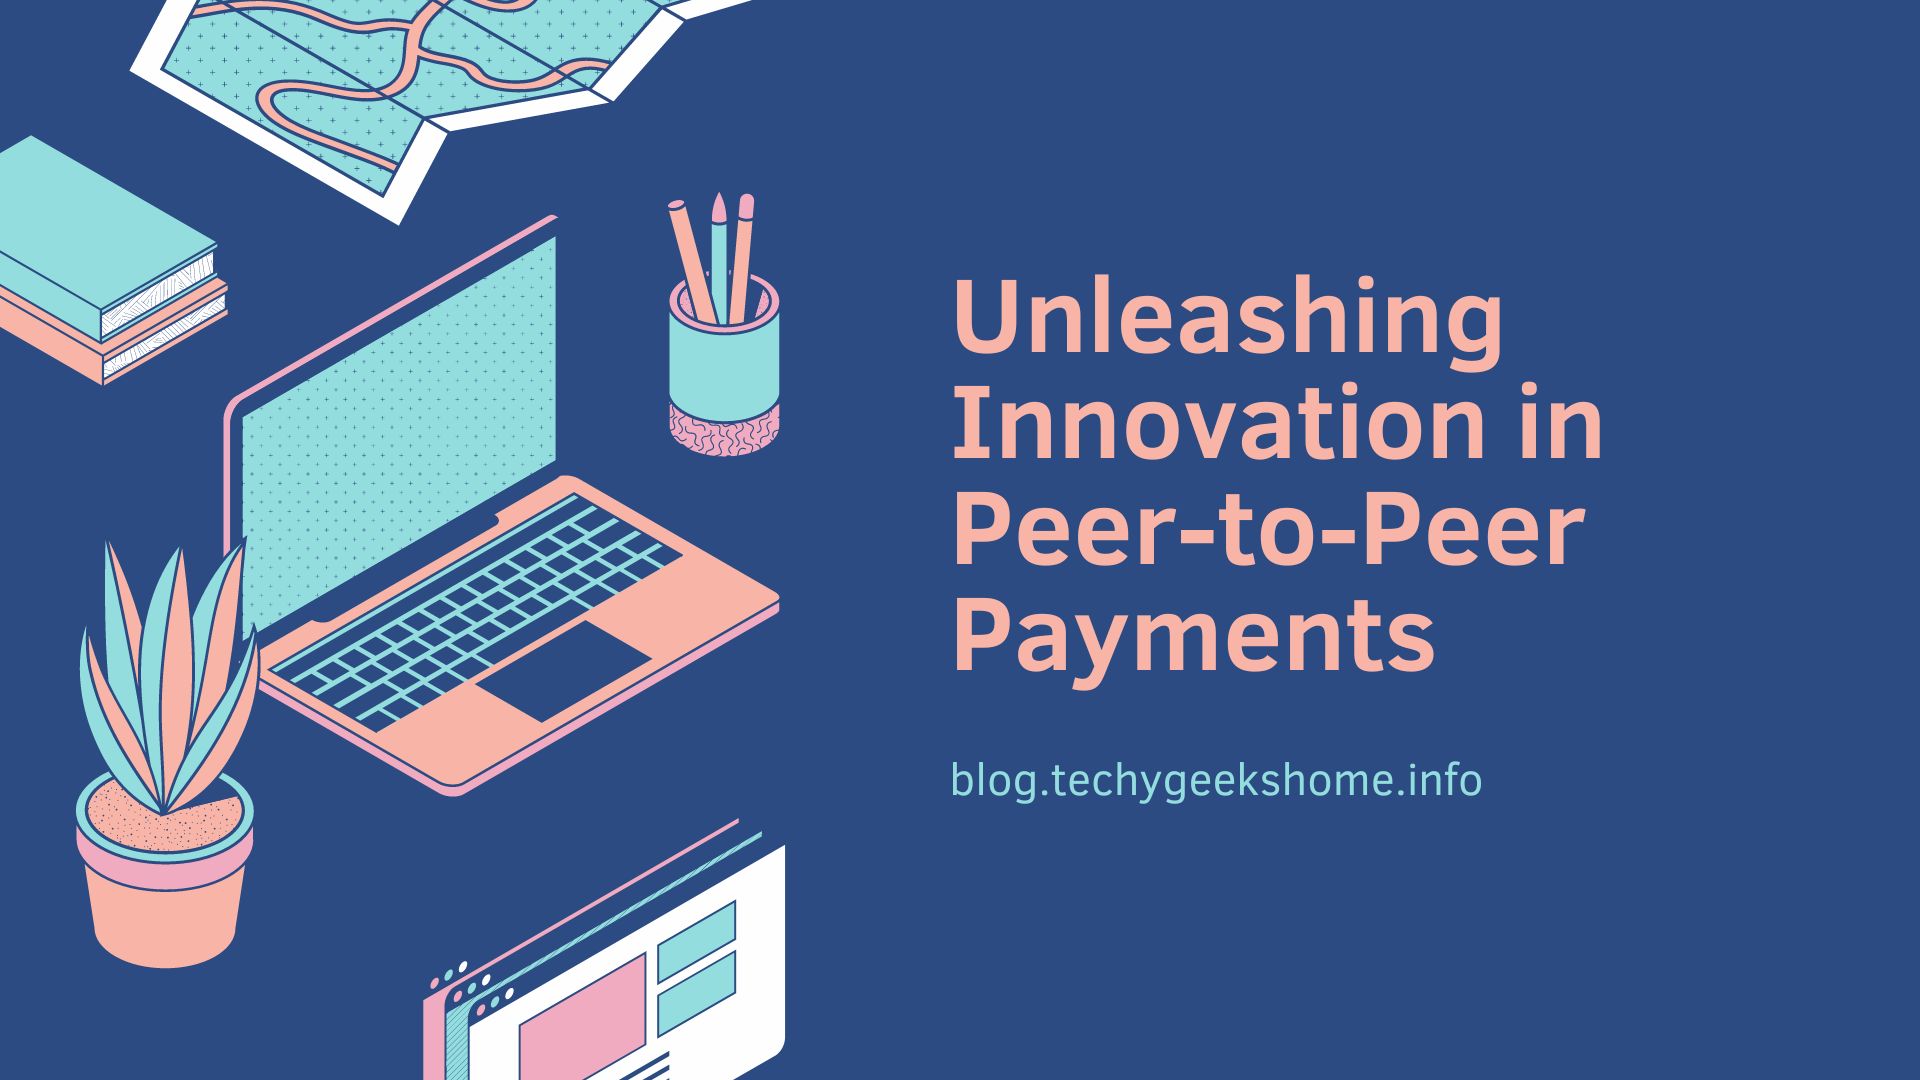 Illustration of a workstation featuring a laptop, books, plant, pencil holder, and graphics with text "unleashing innovation in peer-to-peer payments" for a blog.